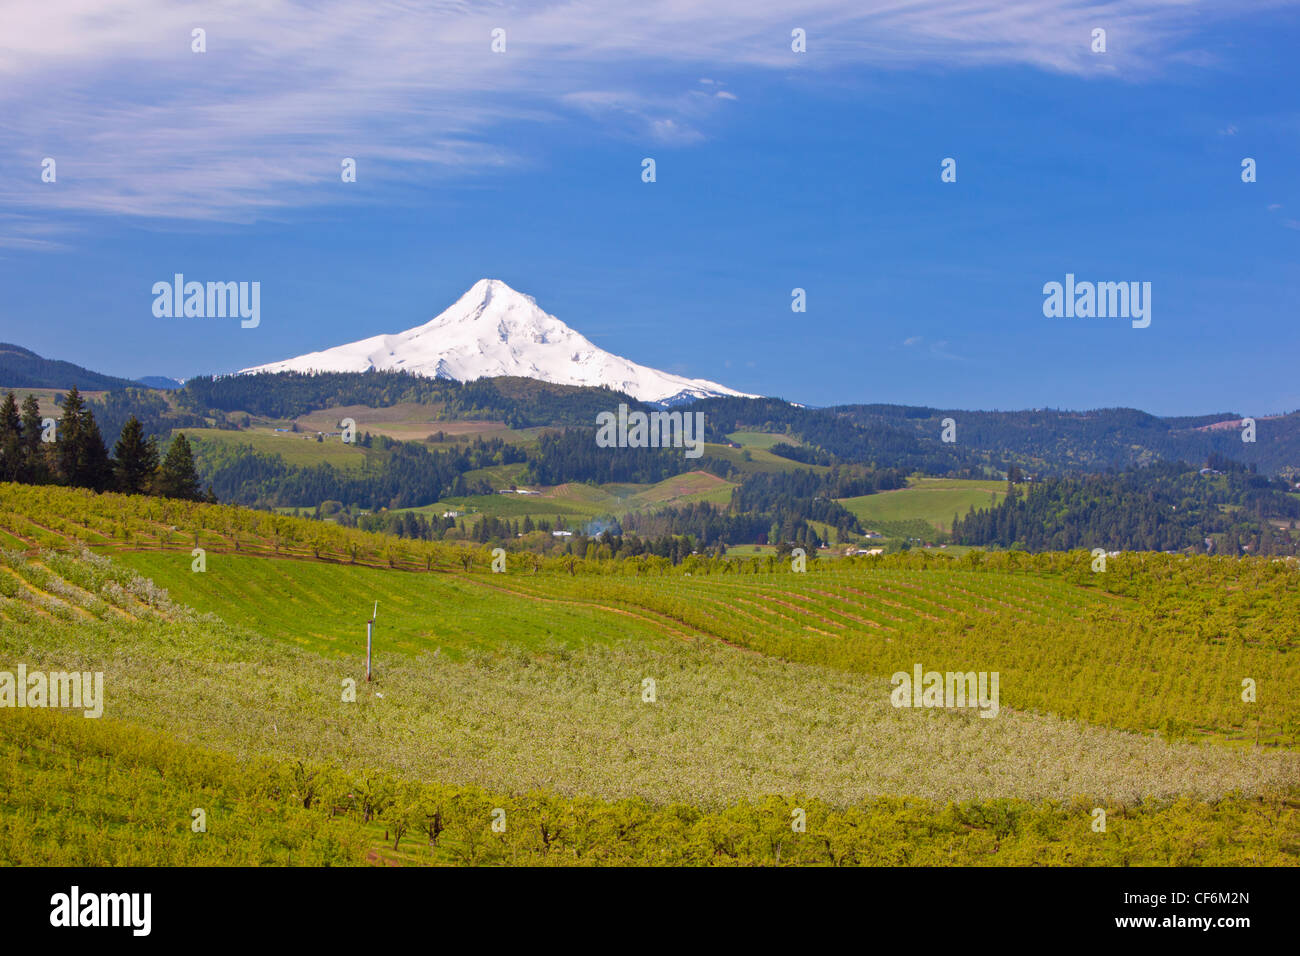 View Of Mount Hood Over A Landscape In The Hood River Valley; Oregon United States Of America Stock Photo